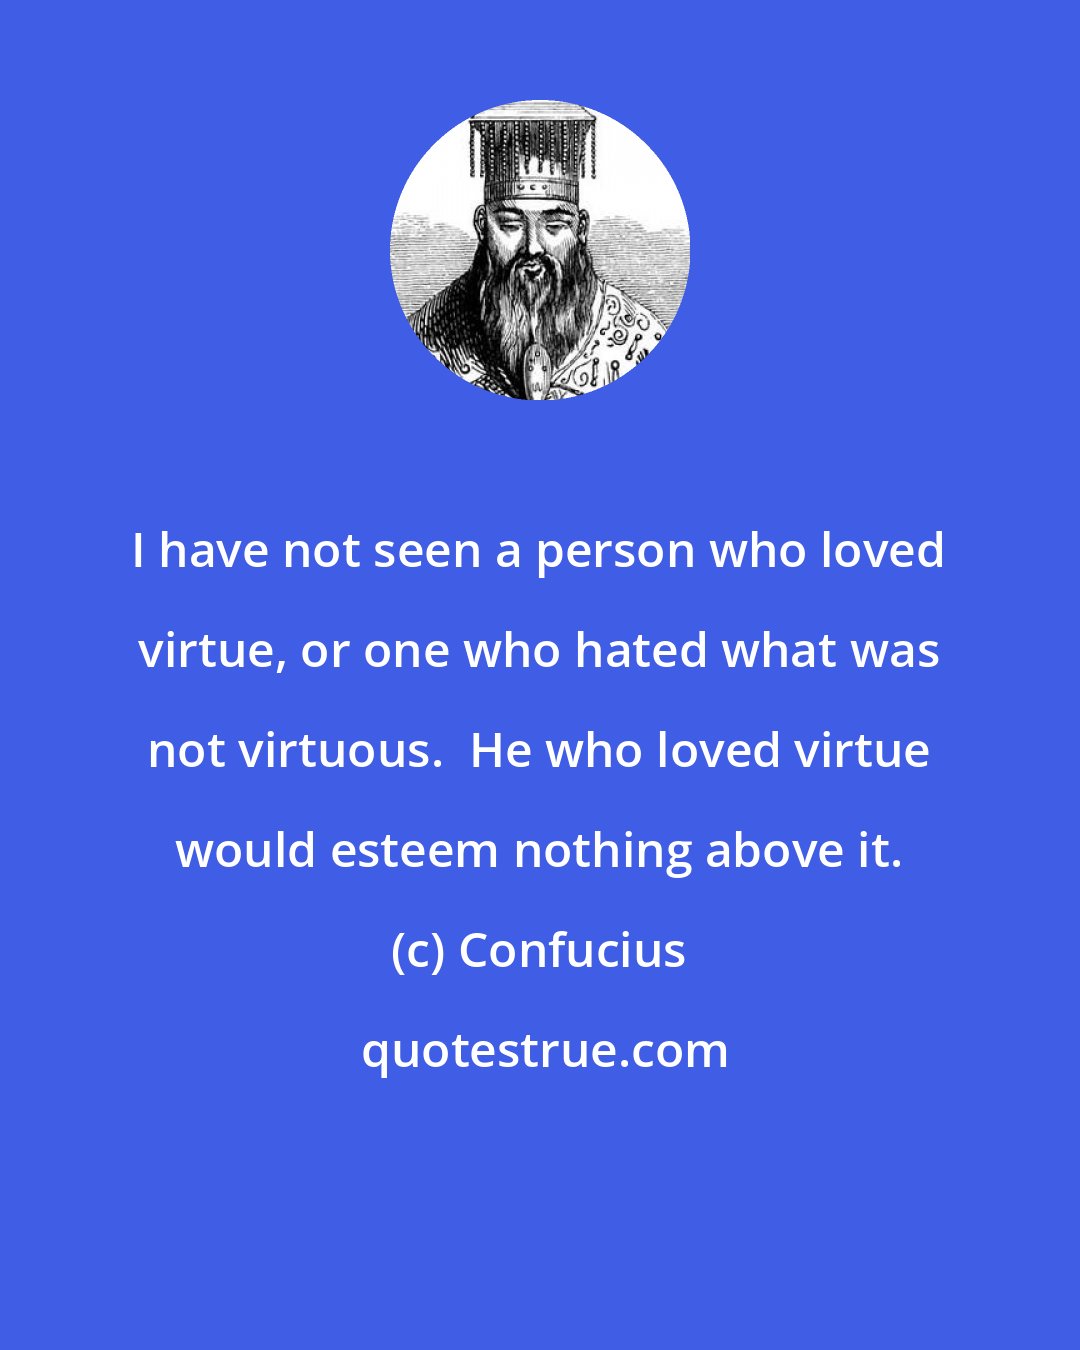 Confucius: I have not seen a person who loved virtue, or one who hated what was not virtuous.  He who loved virtue would esteem nothing above it.